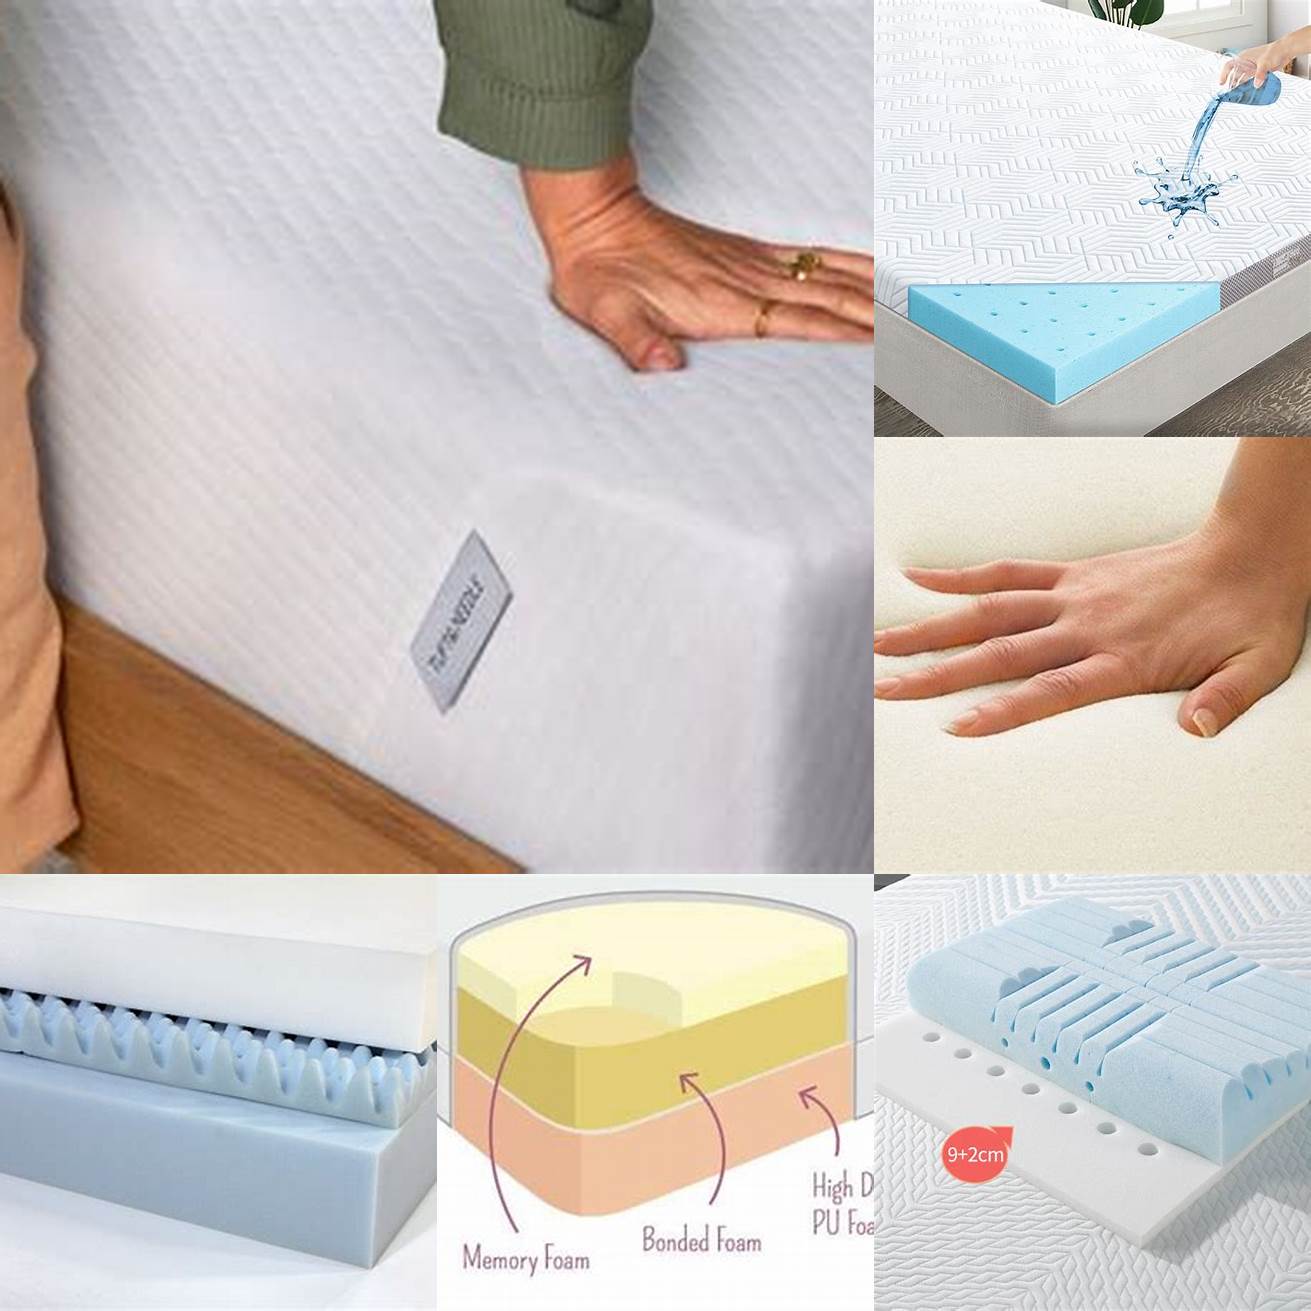 Traditional memory foam This is the most common type of memory foam known for its contouring properties and pressure relief